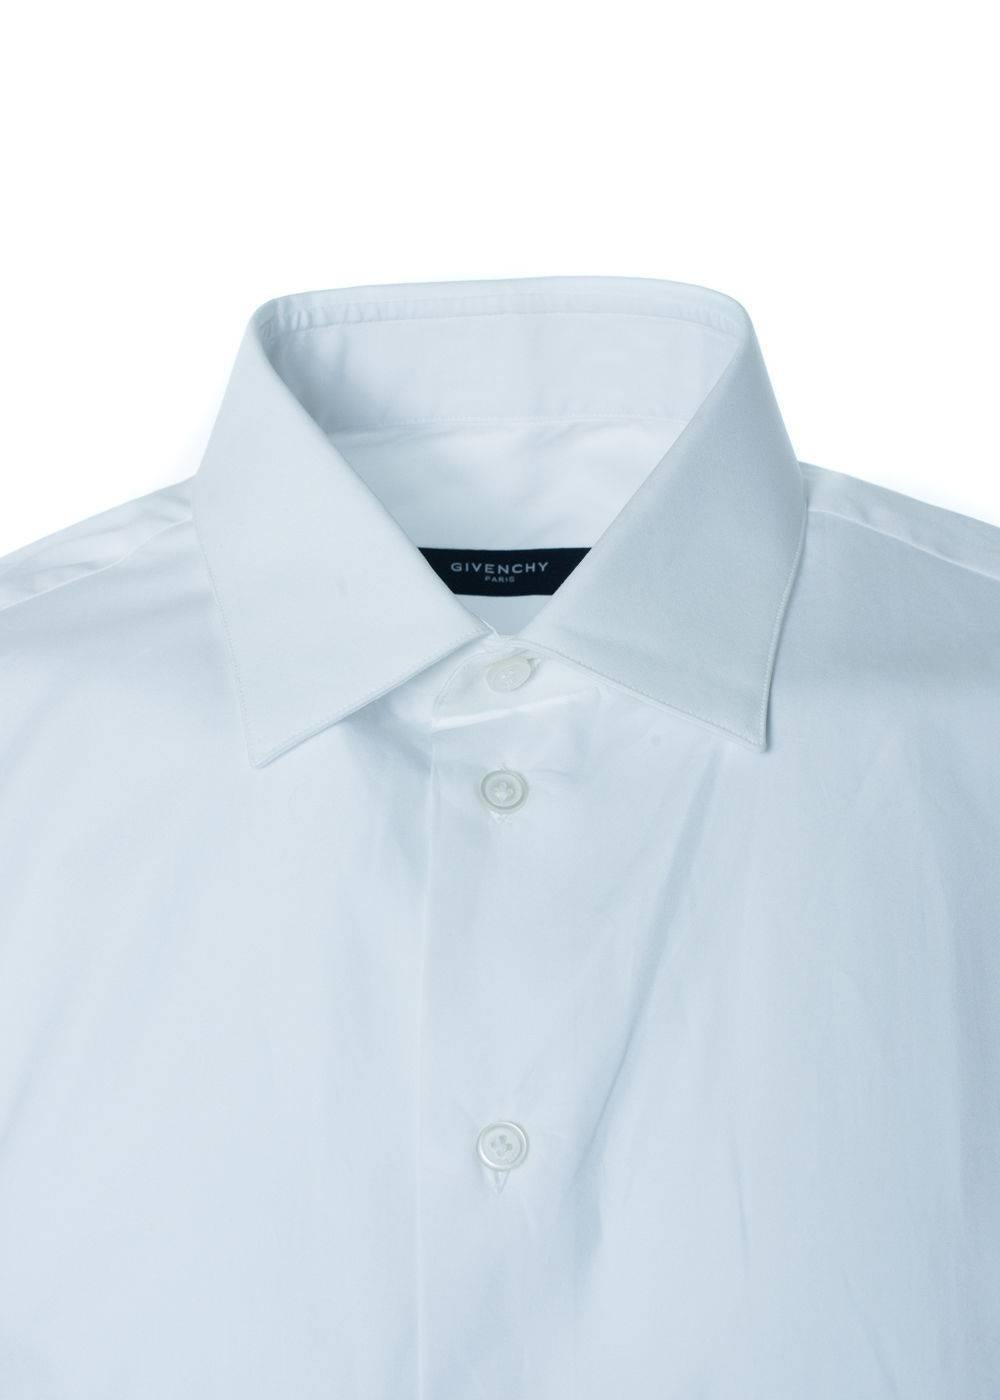 Brand New Givenchy Men's Button Down 
Original Tags
Retails in Stores & Online for $350
Men's Size E46 (S) Fits True to Size

Every man needs a classic white button down for those professional settings or dressy outings. This Givenchy button down is